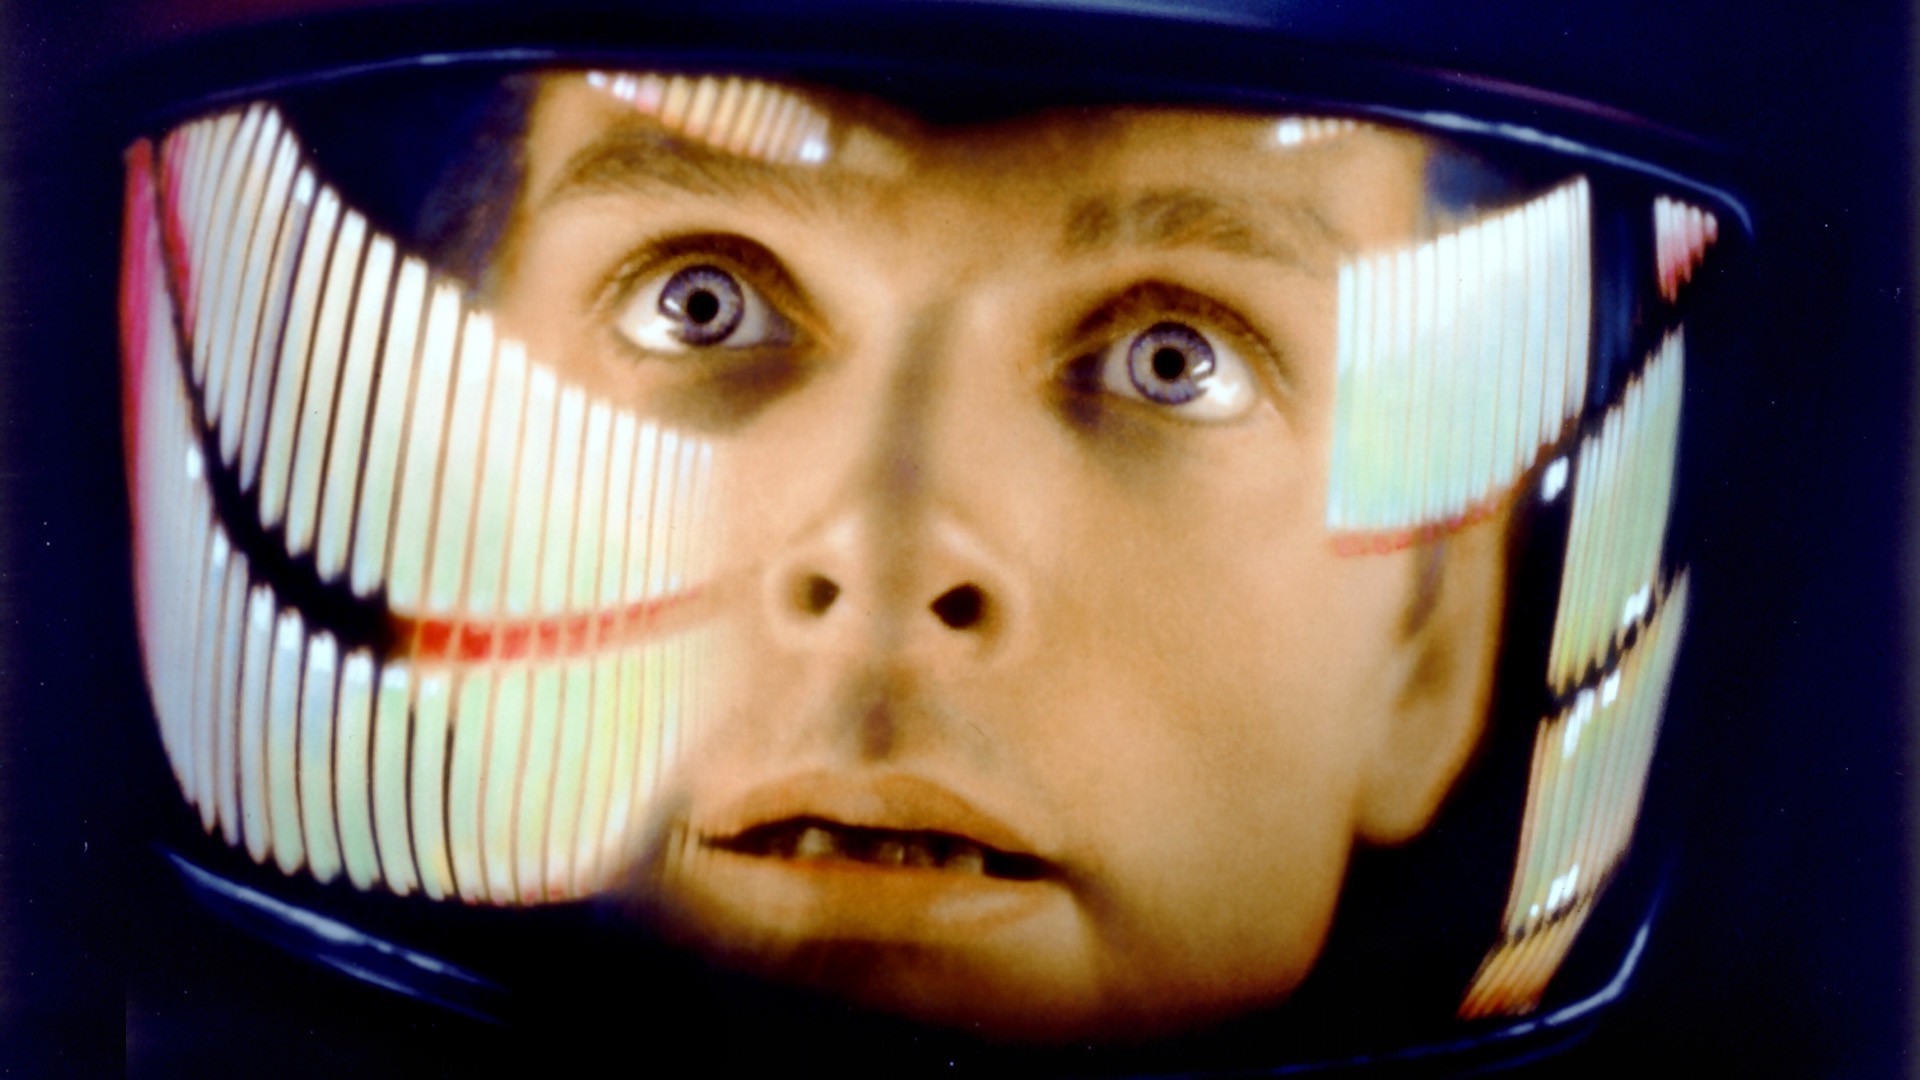 2001: A Space Odyssey, Movies, Science Fiction Wallpaper